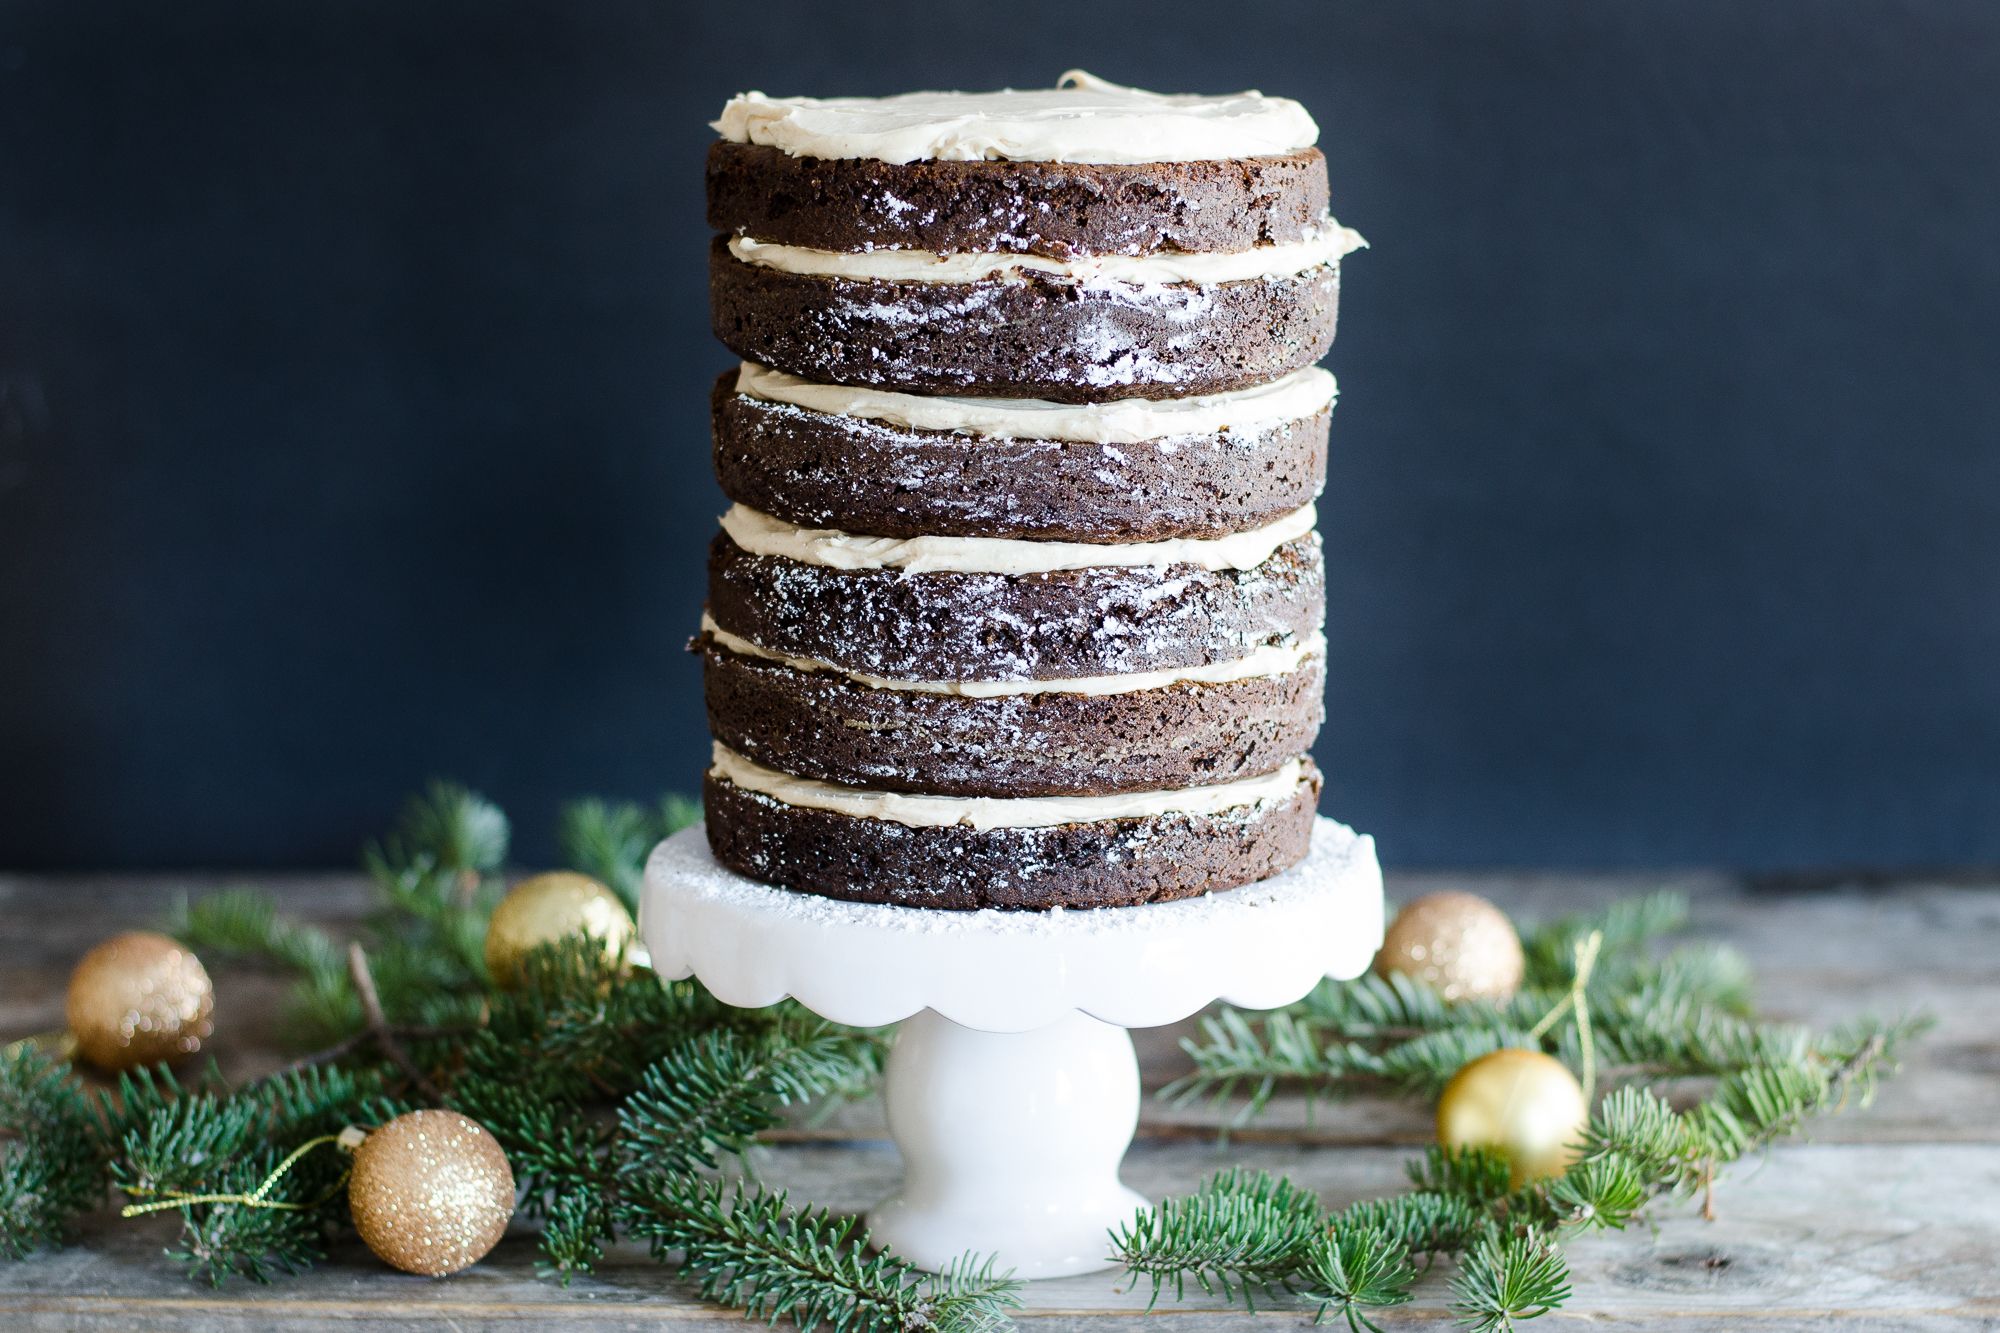 Gingerbread Cake with Cinnamon Frosting - Supergolden Bakes